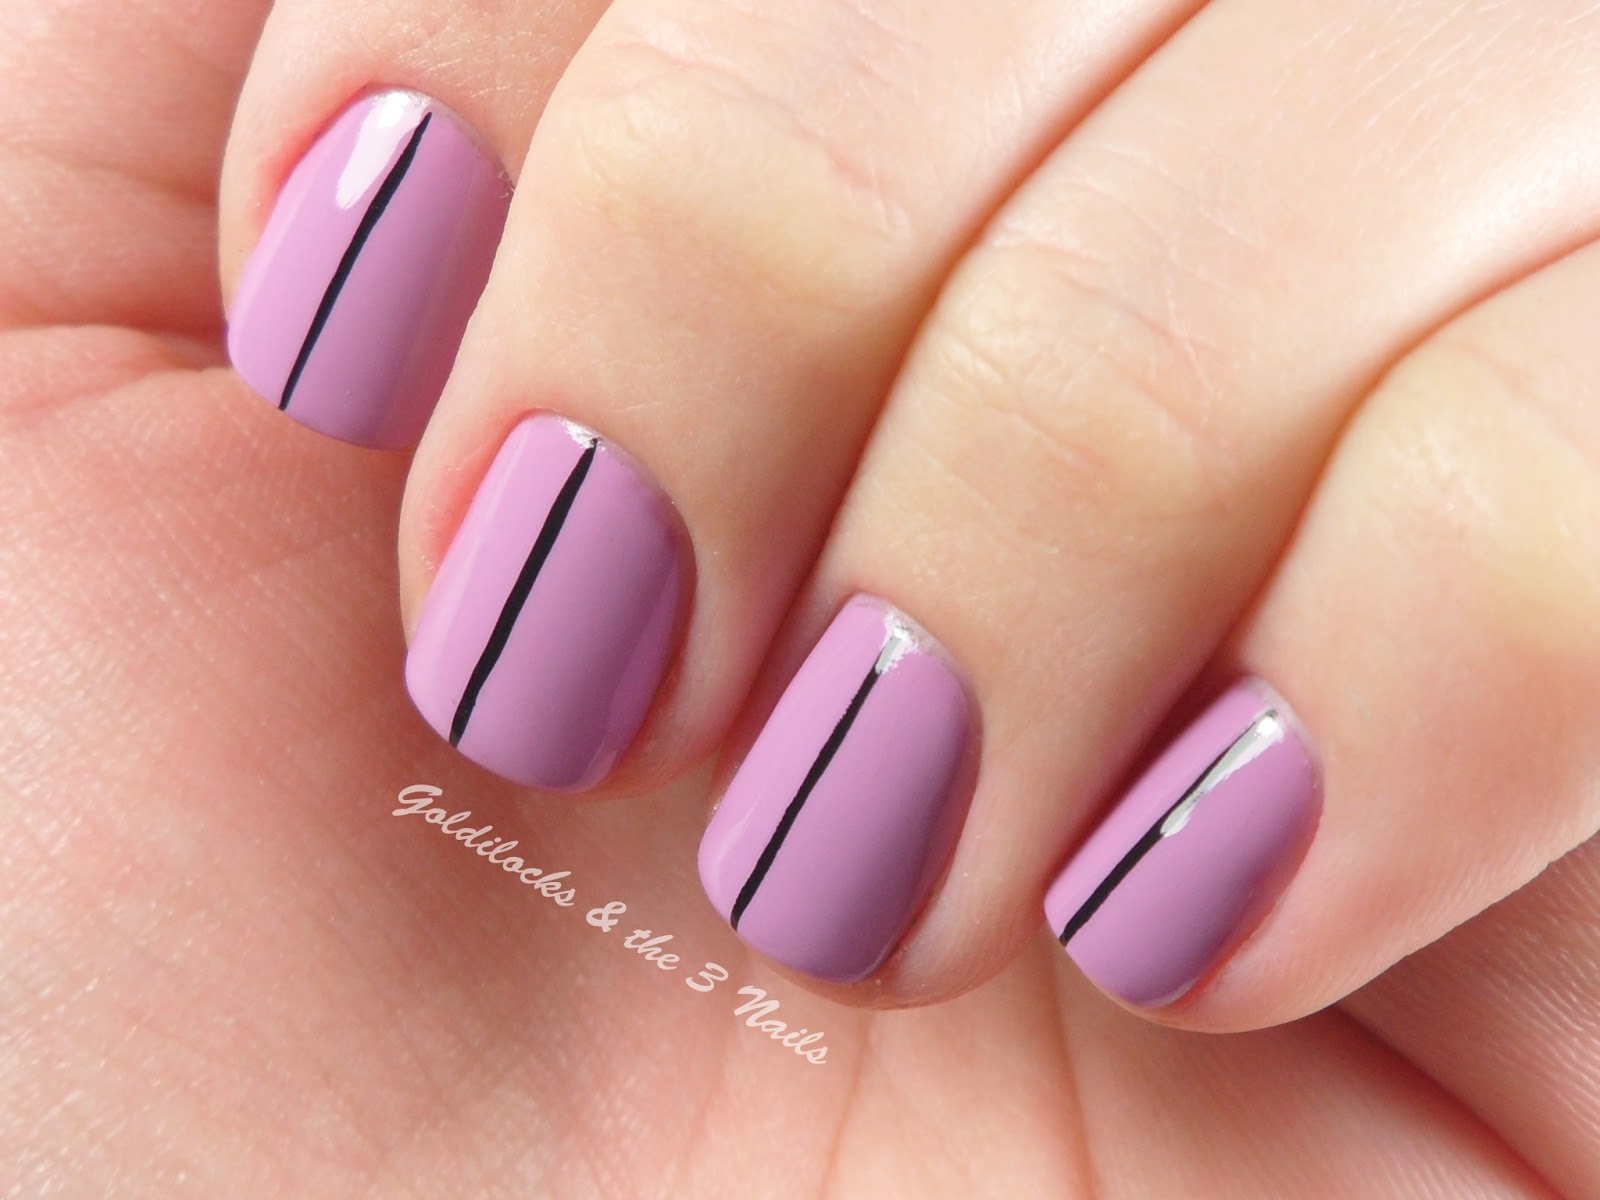 5. Minimalist Nail Art with Lines - wide 4